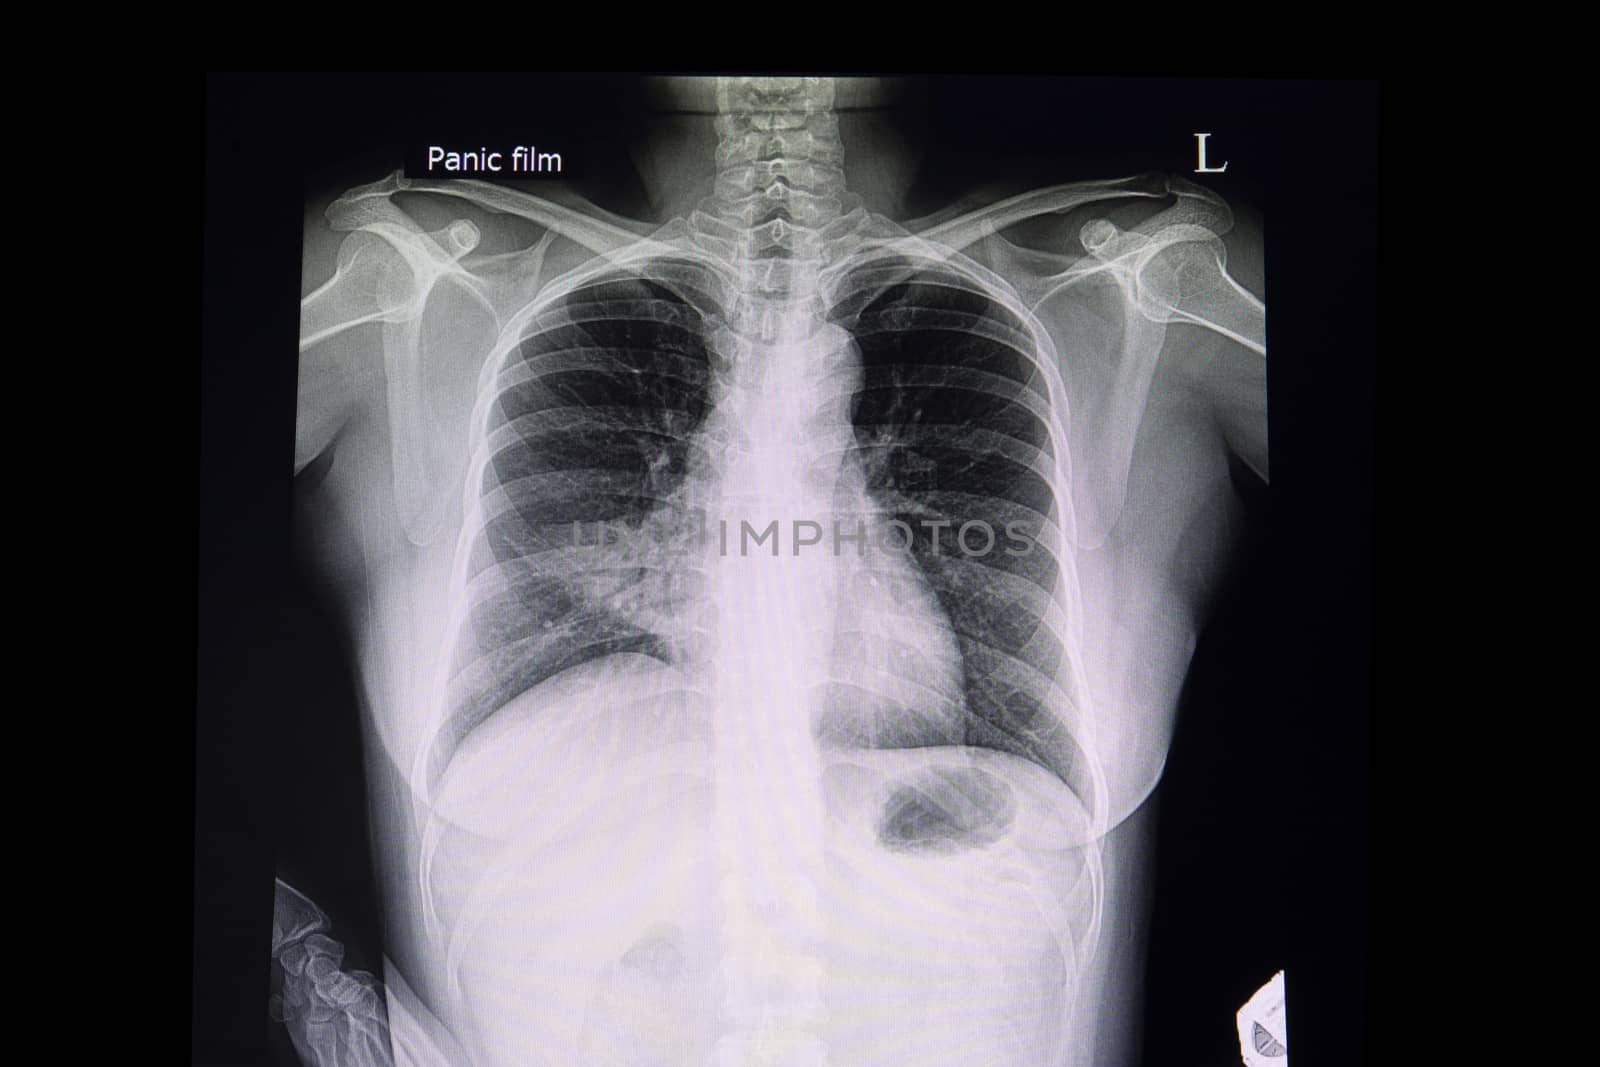 A chest xray film of a patient with pneumonia in his right middle lung. A case of abnormal x ray. Bacterial infection suspected.